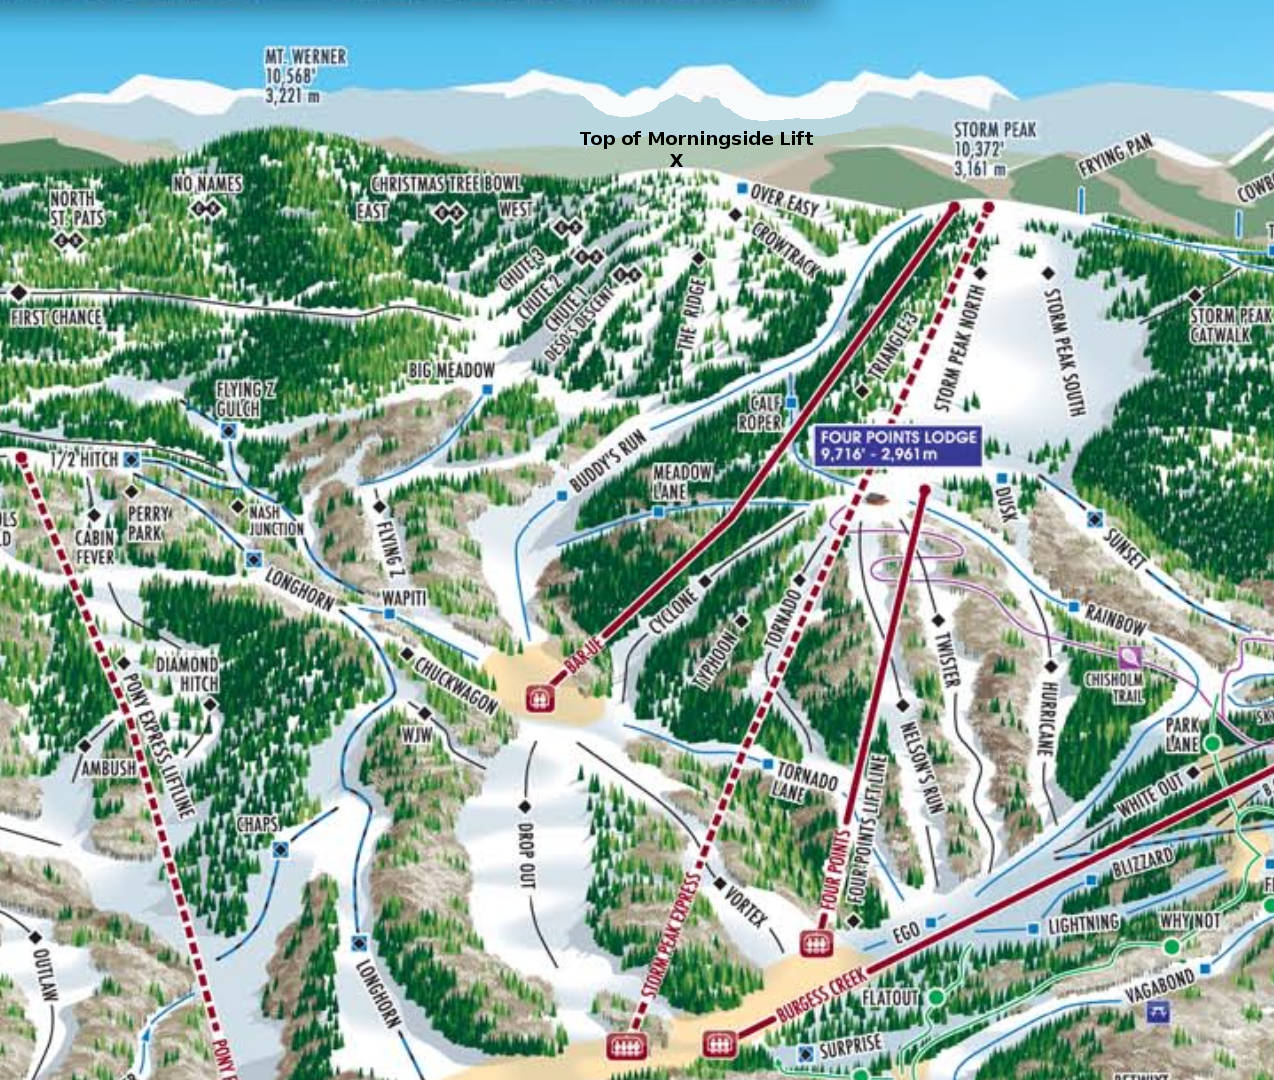 Steamboat Springs Colorado Us Ski Resort Review And Guide 7620